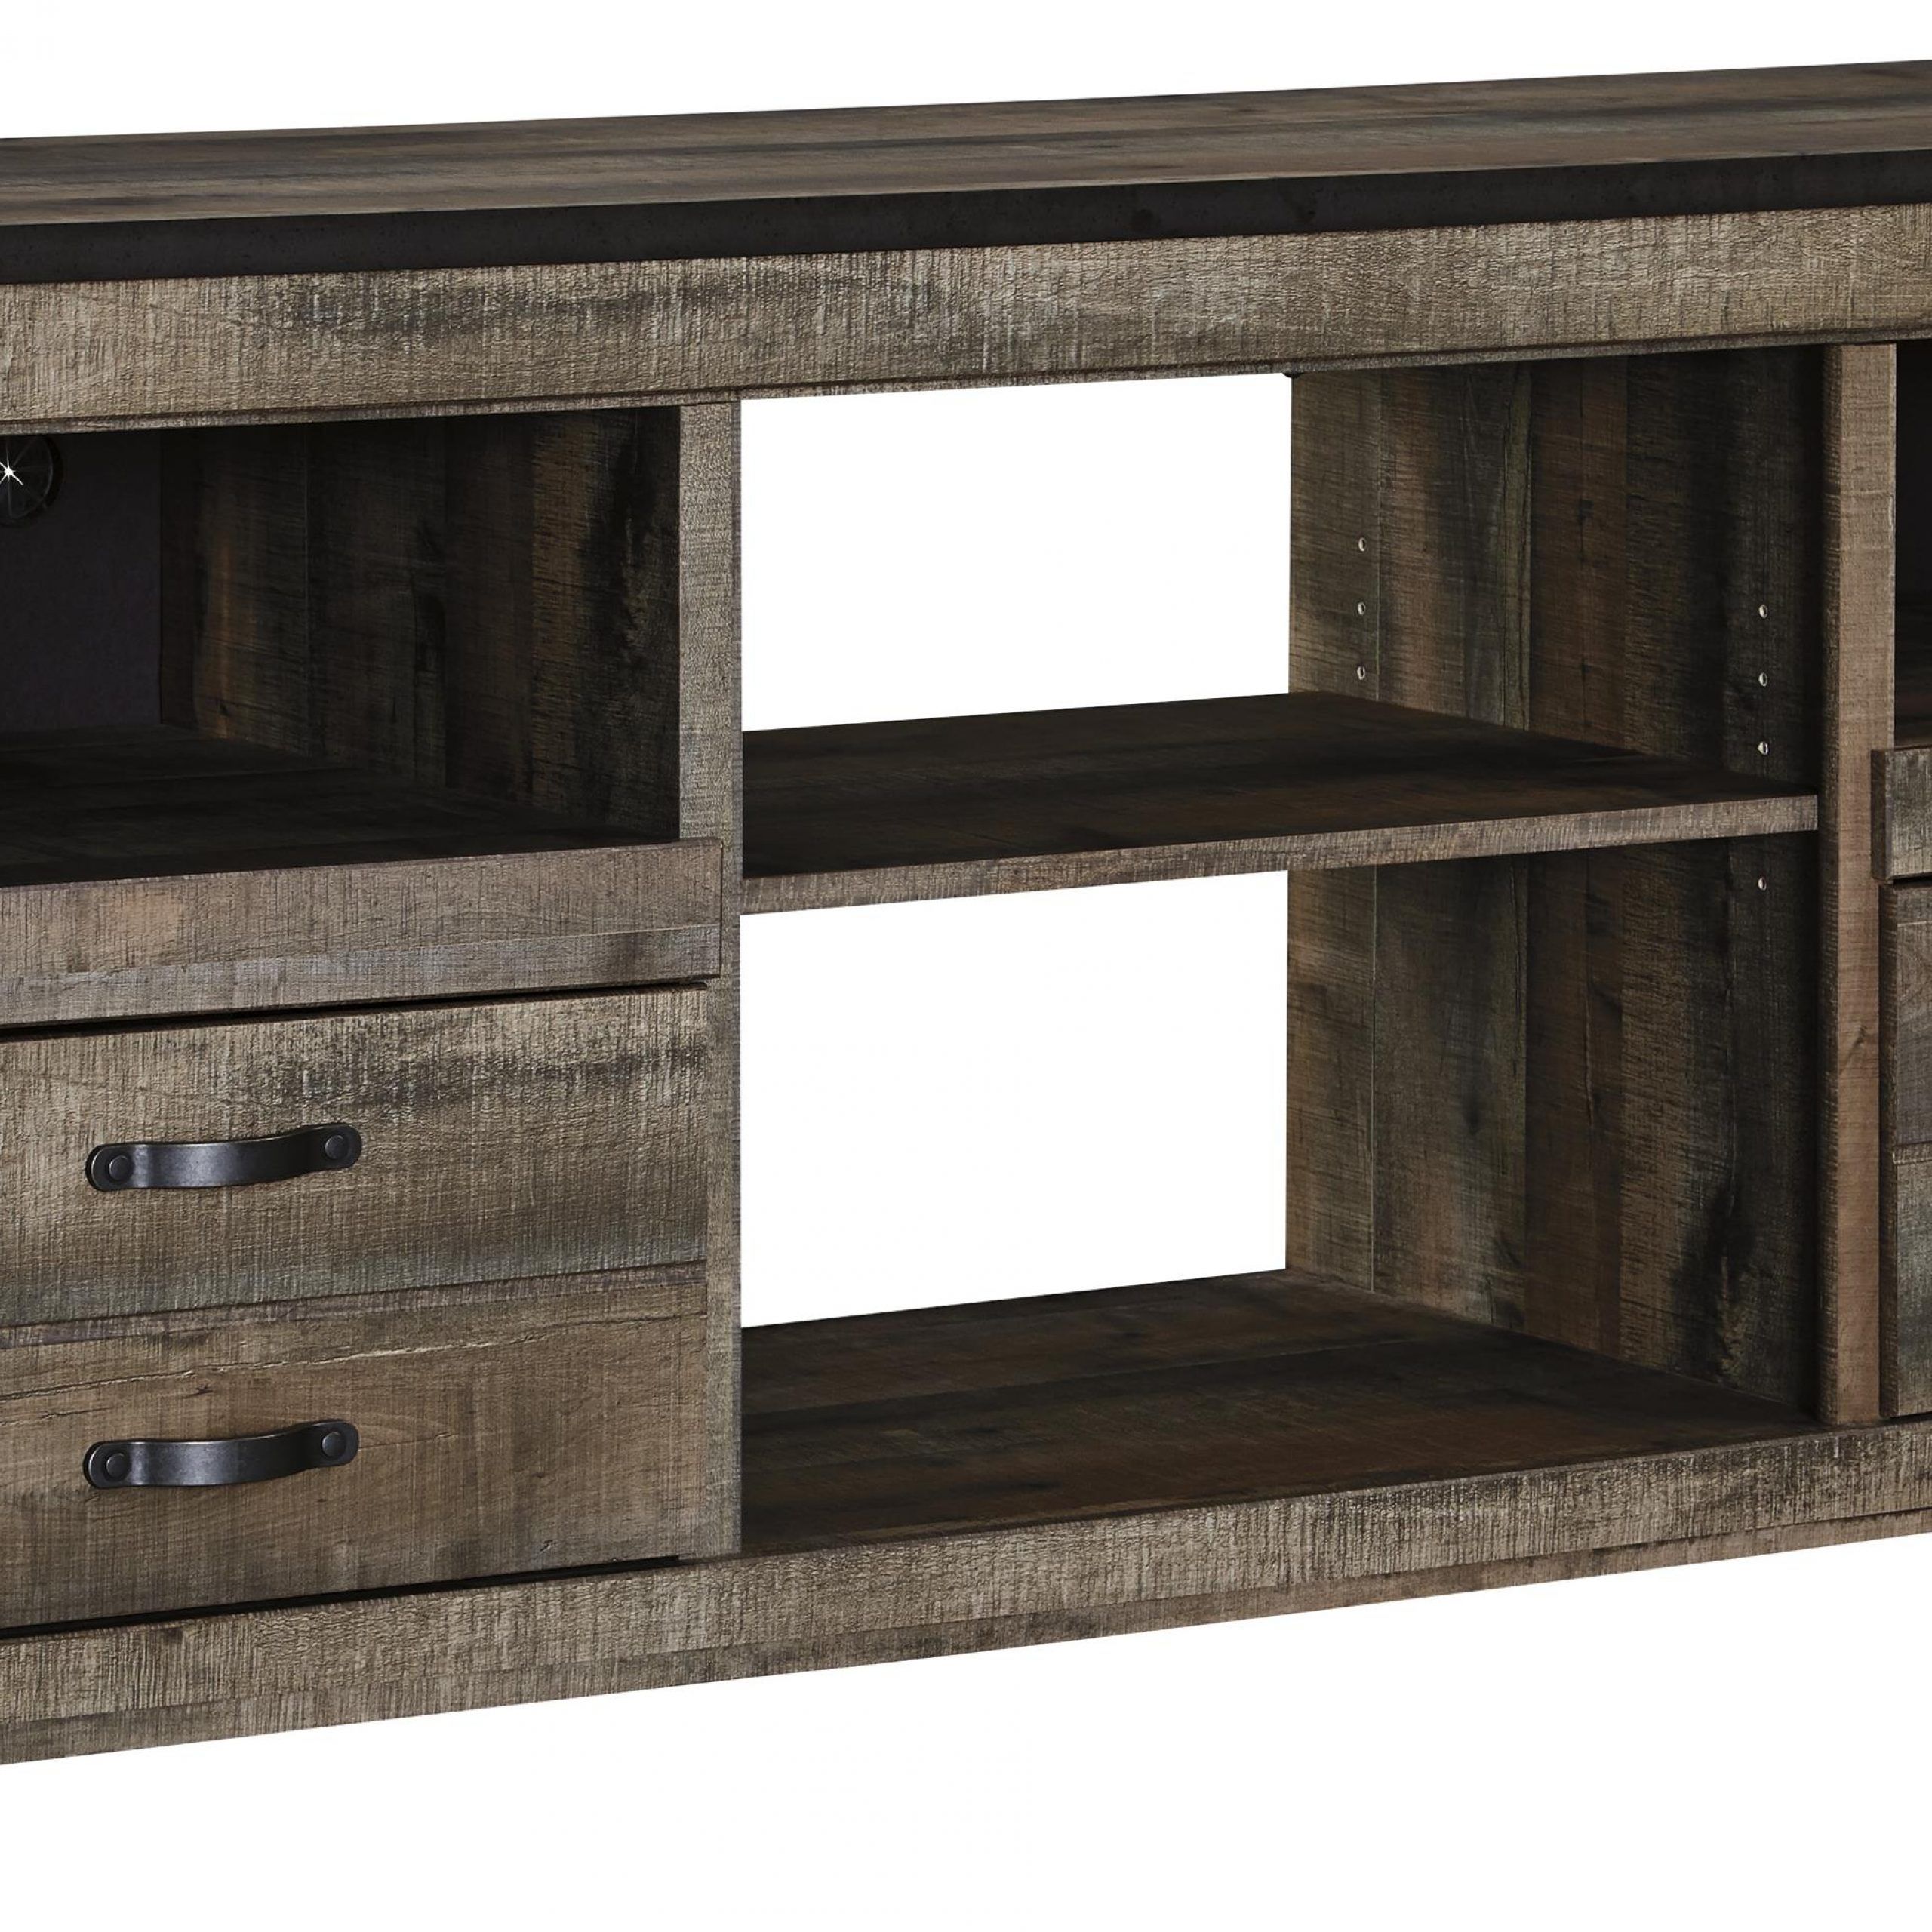 Vendor 3 Trinell 0170085 Rustic Large Tv Stand With Metal Throughout Chromium Extra Wide Tv Unit Stands (View 10 of 15)